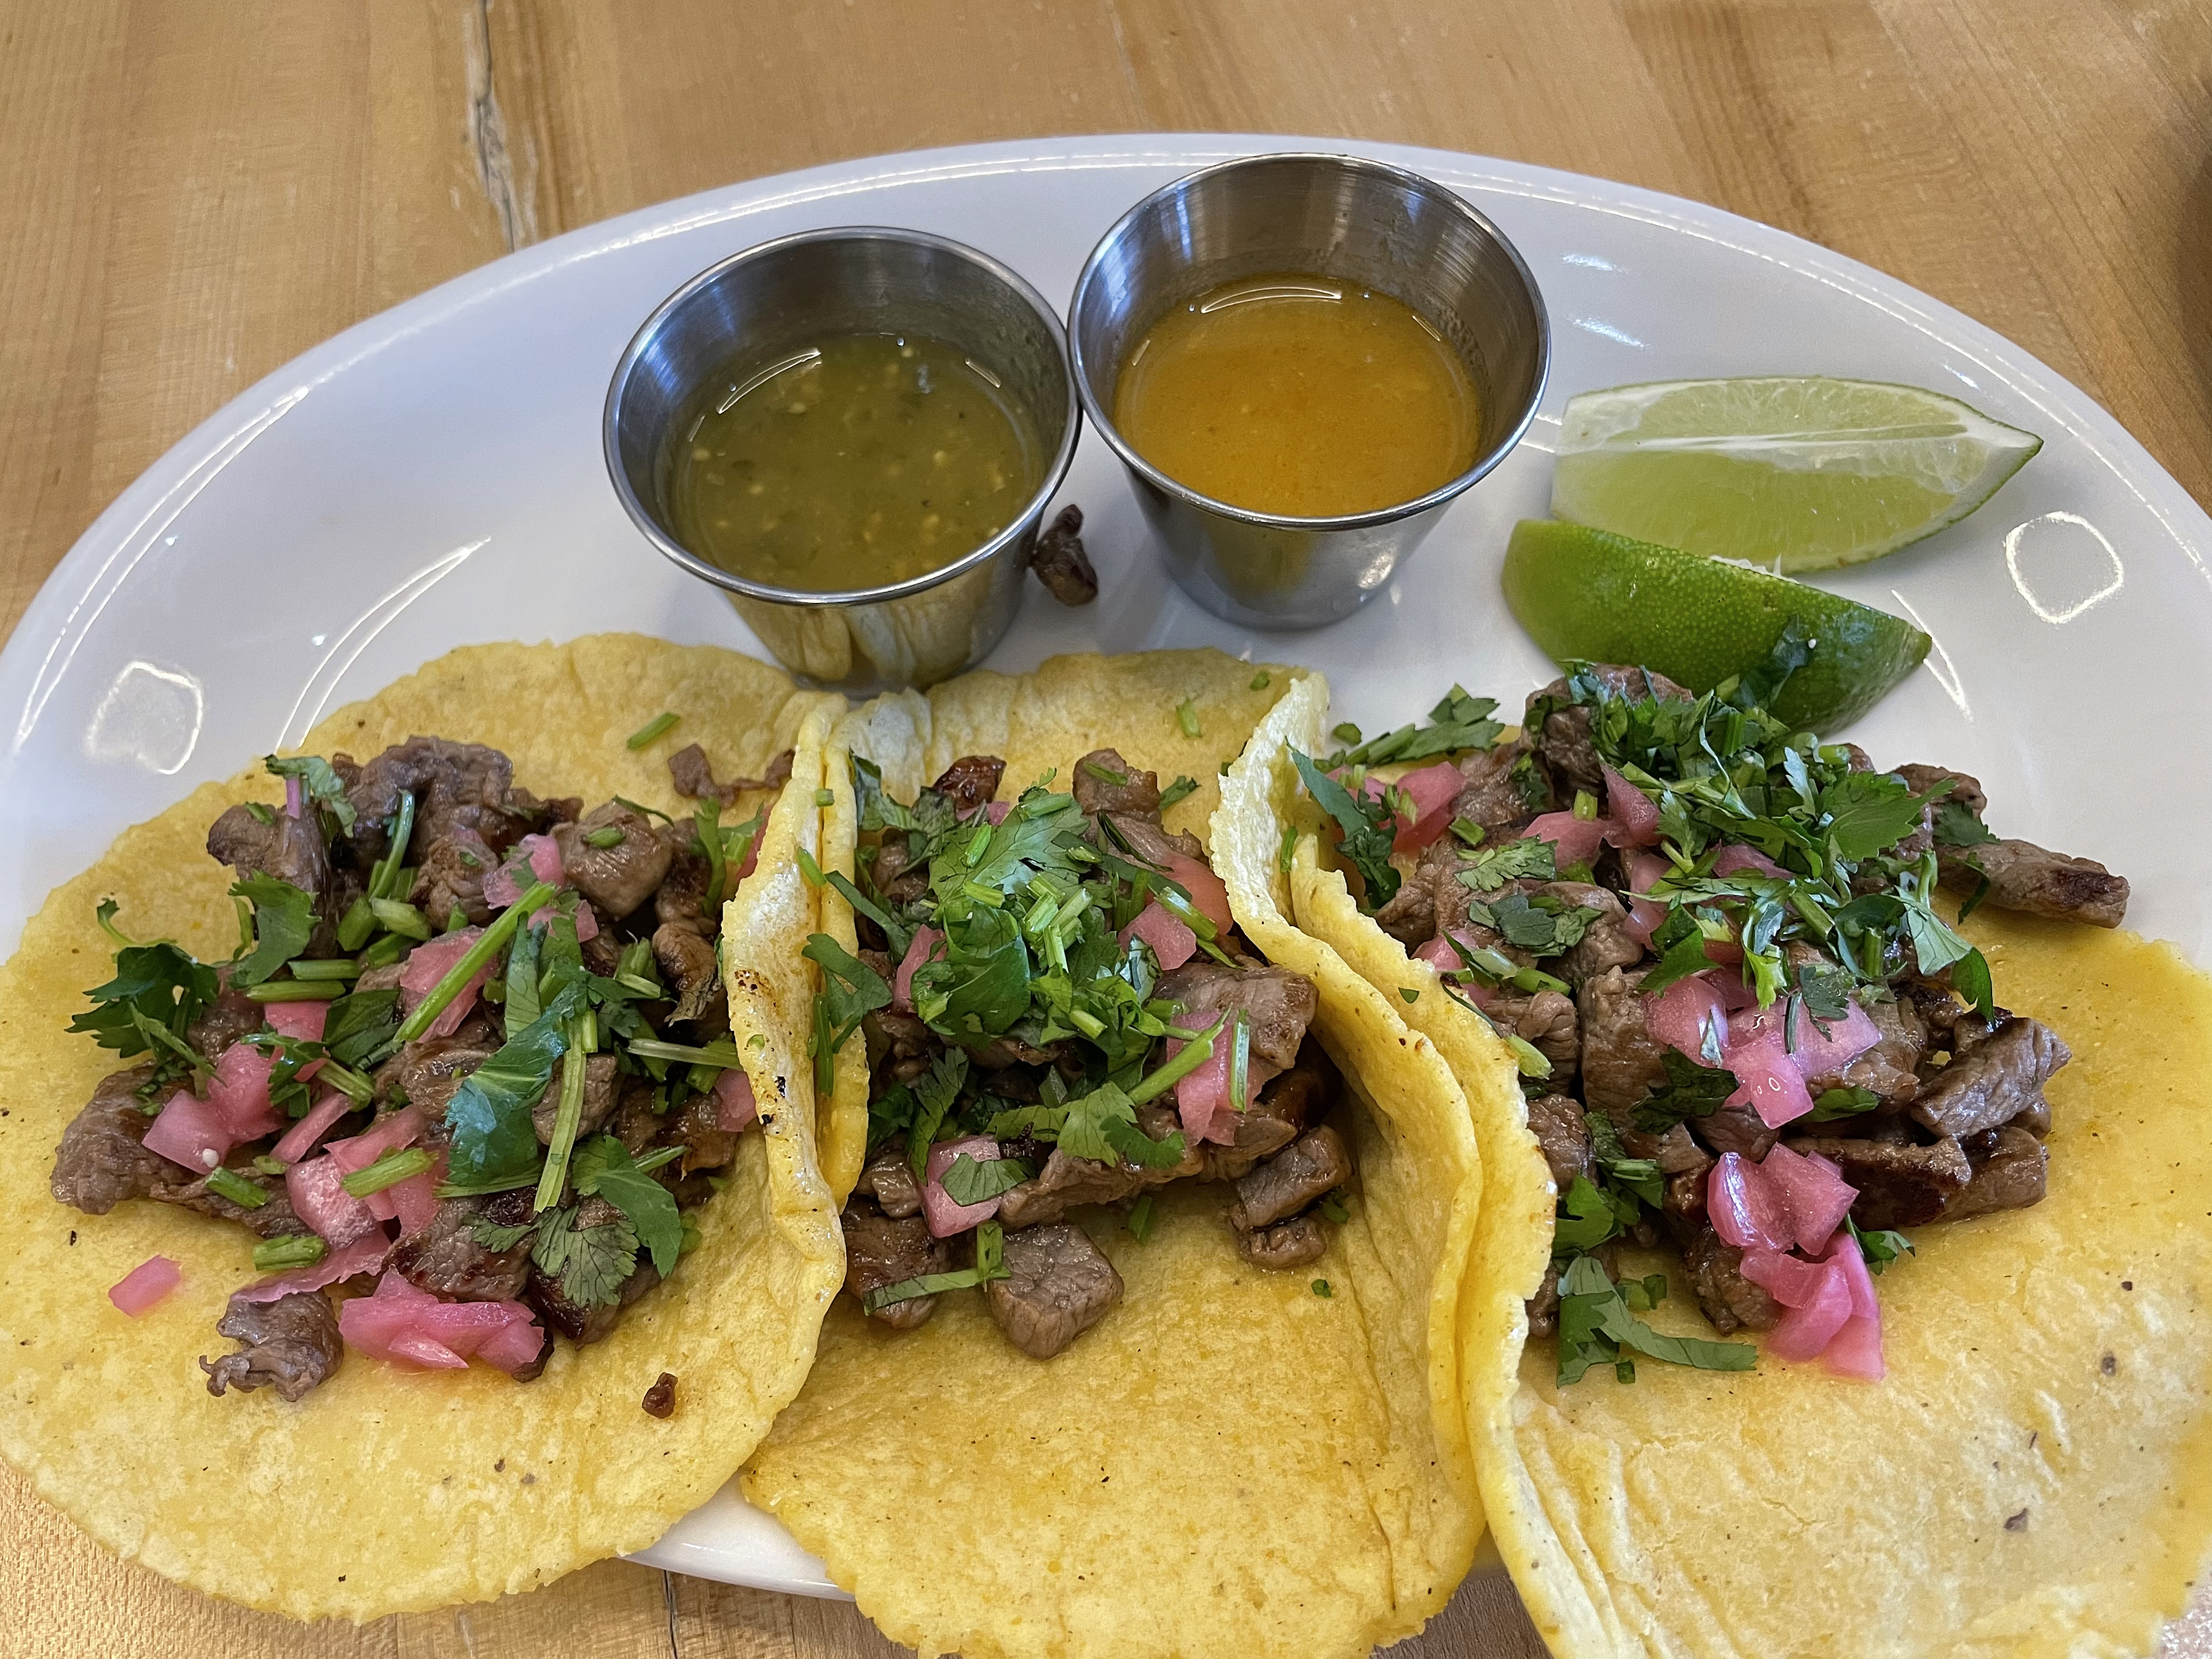 Lunch dishes at Con Huevos are worthy too, like these three grilled beef carne asada tacos made on a base of thick fresh corn tortillas.